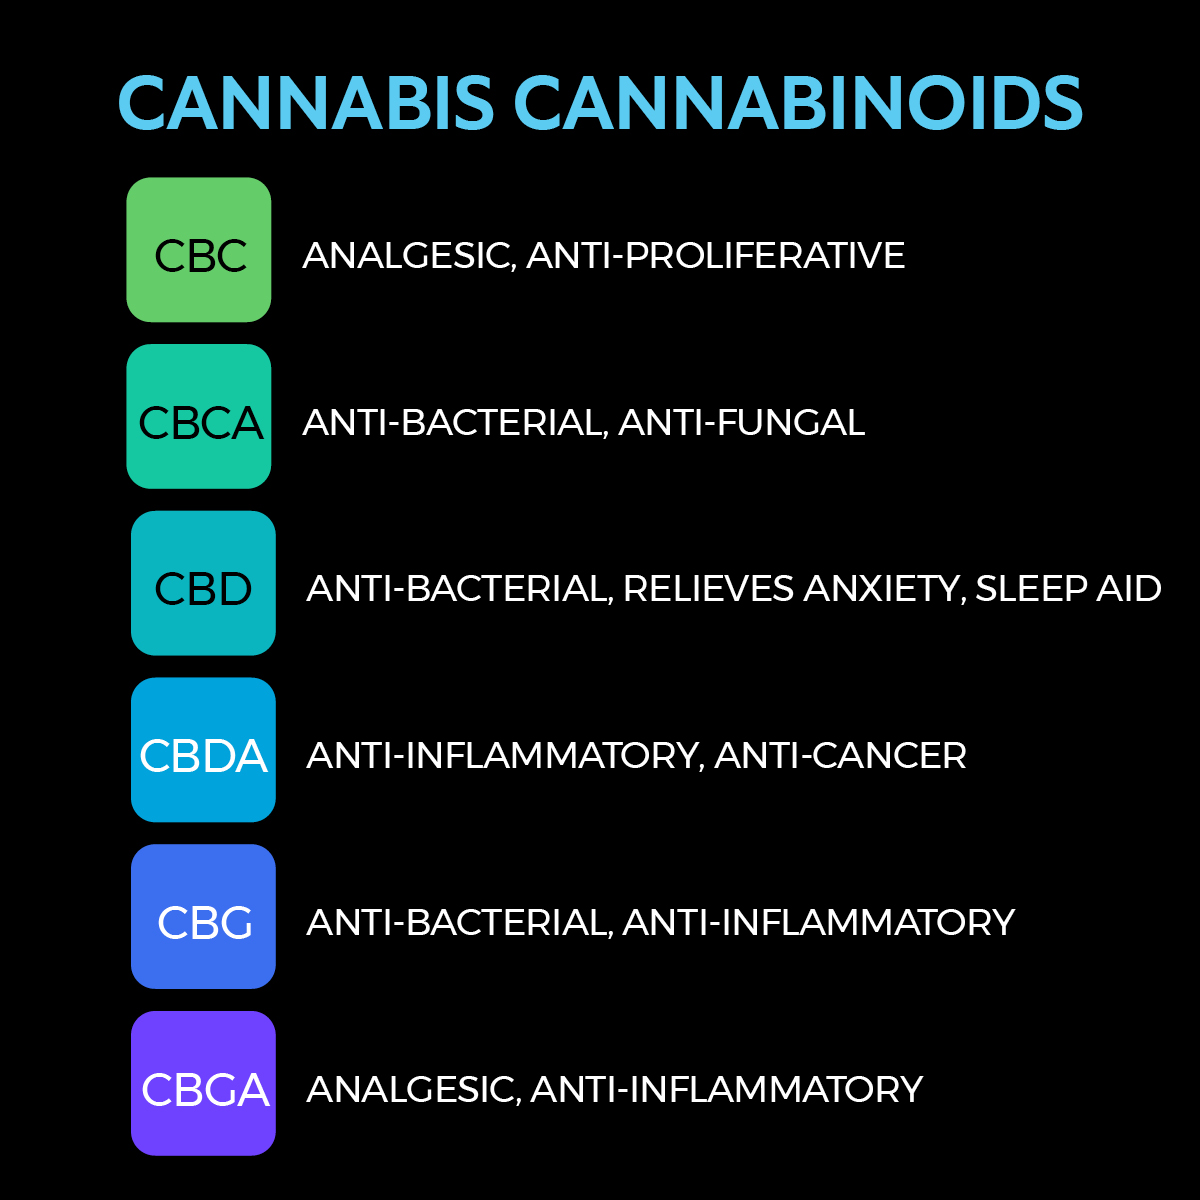 More of the most common Cannabinoids in Cannabis, and their beneficial properties.
Check out our latest posts for more information.
#cannabisisbeautiful